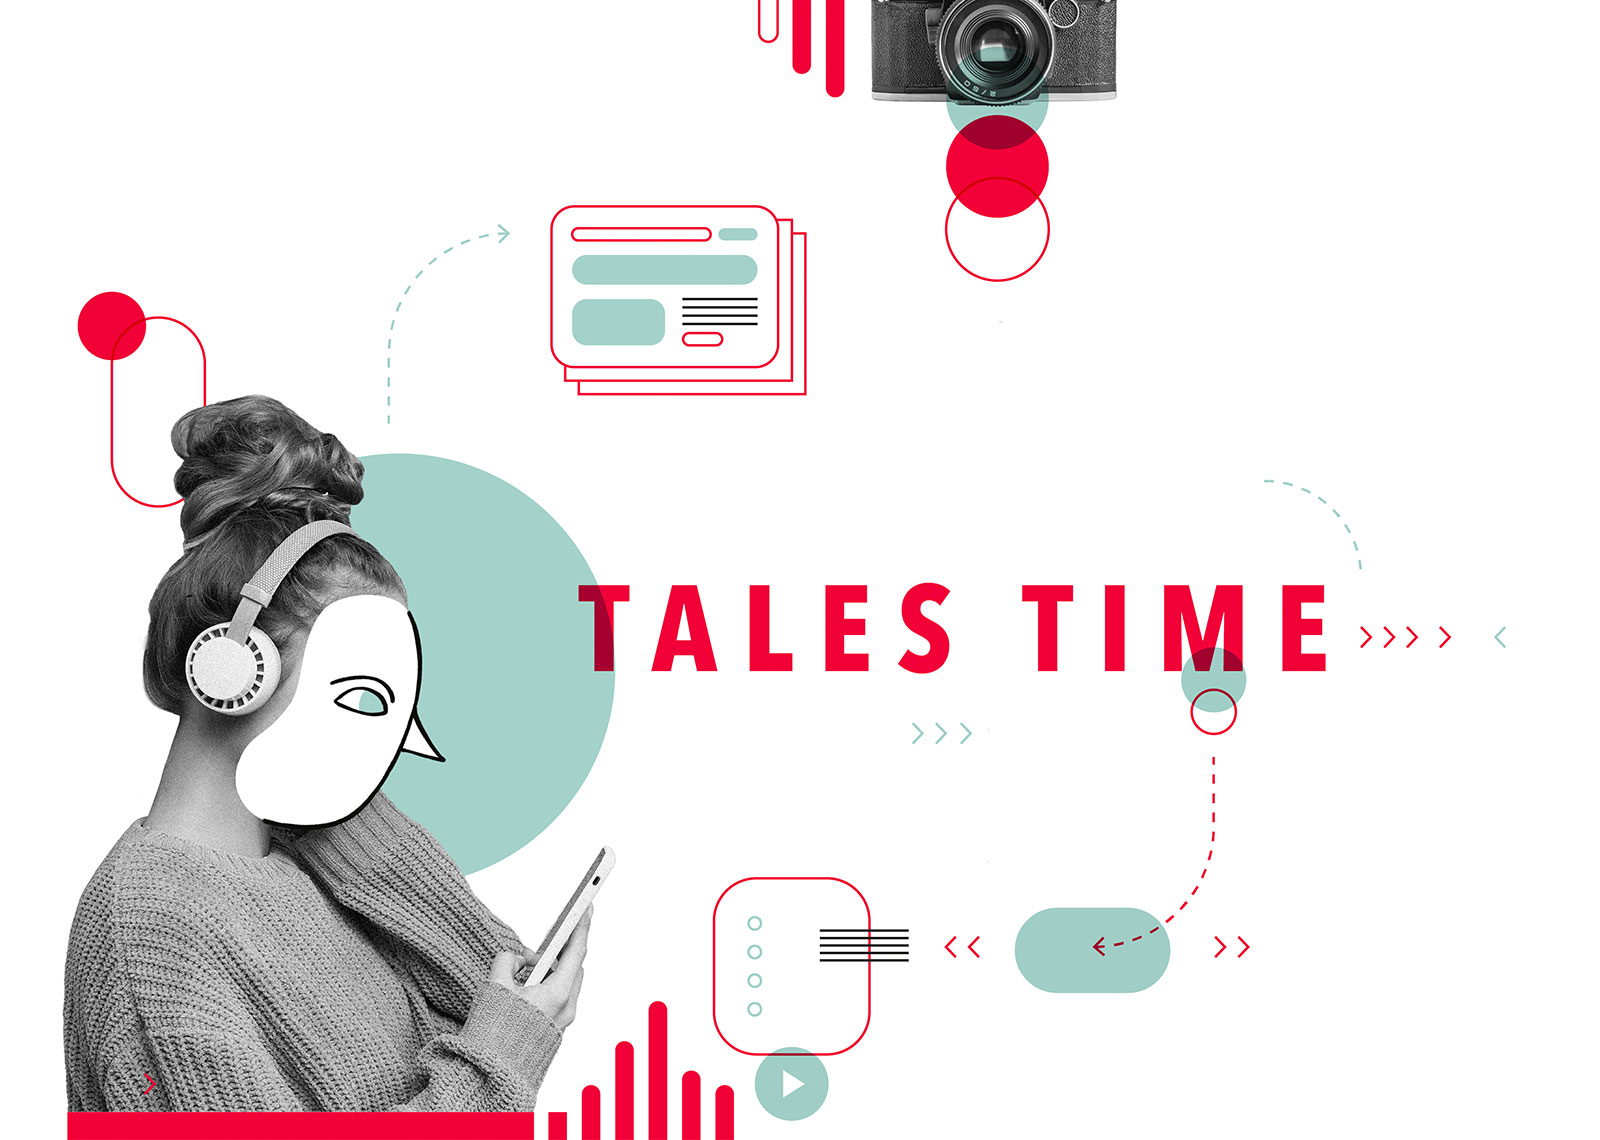 Tales-time